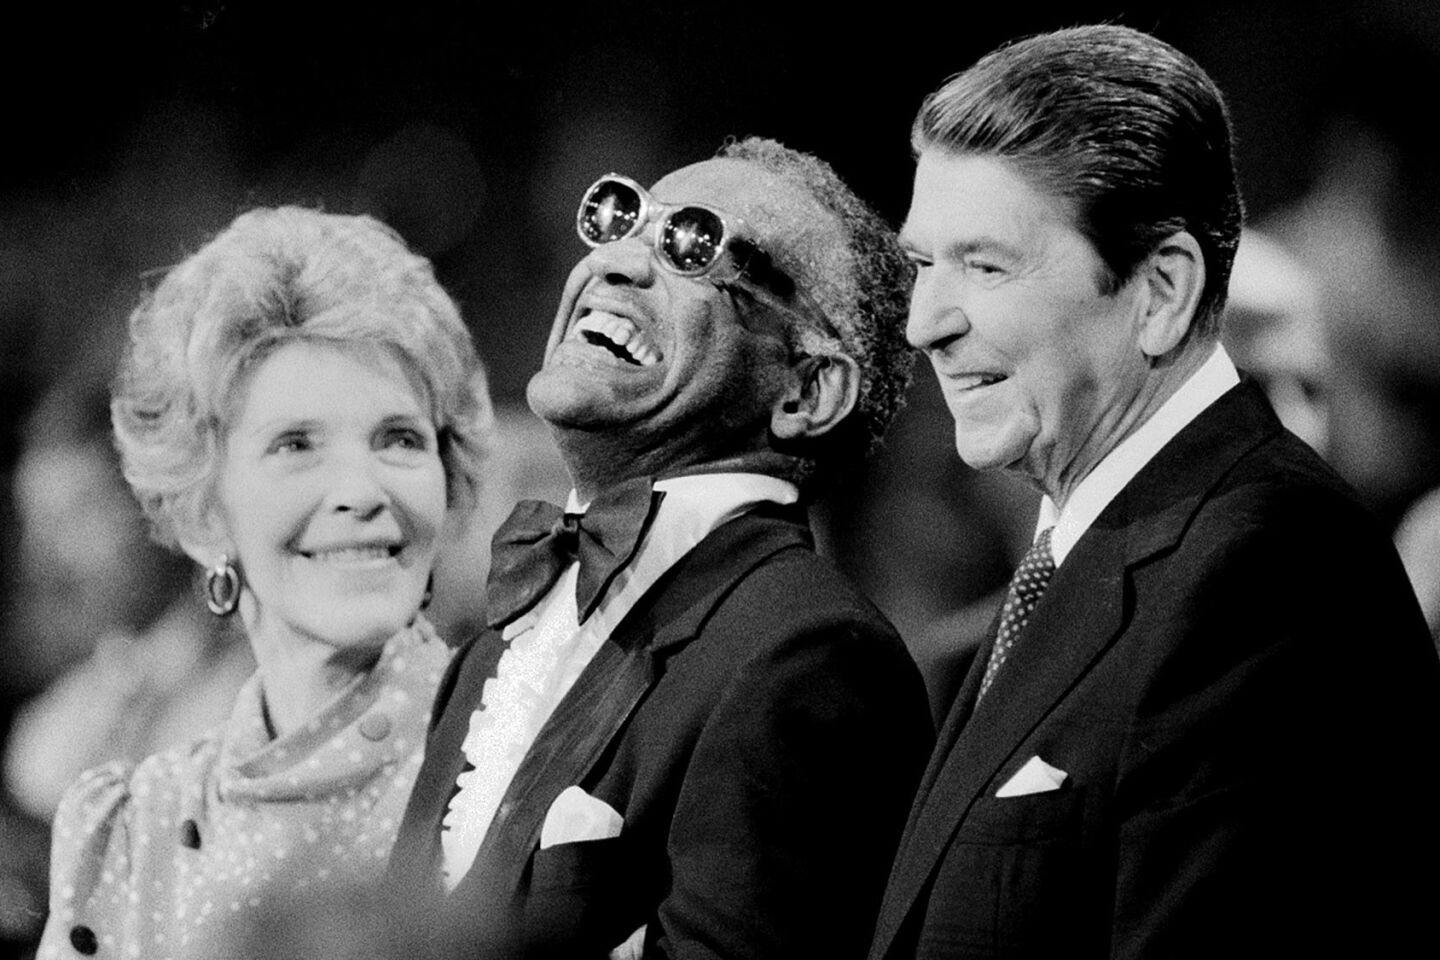 The Reagans with music legend Ray Charles at a musical salute in Washington in March 1983.